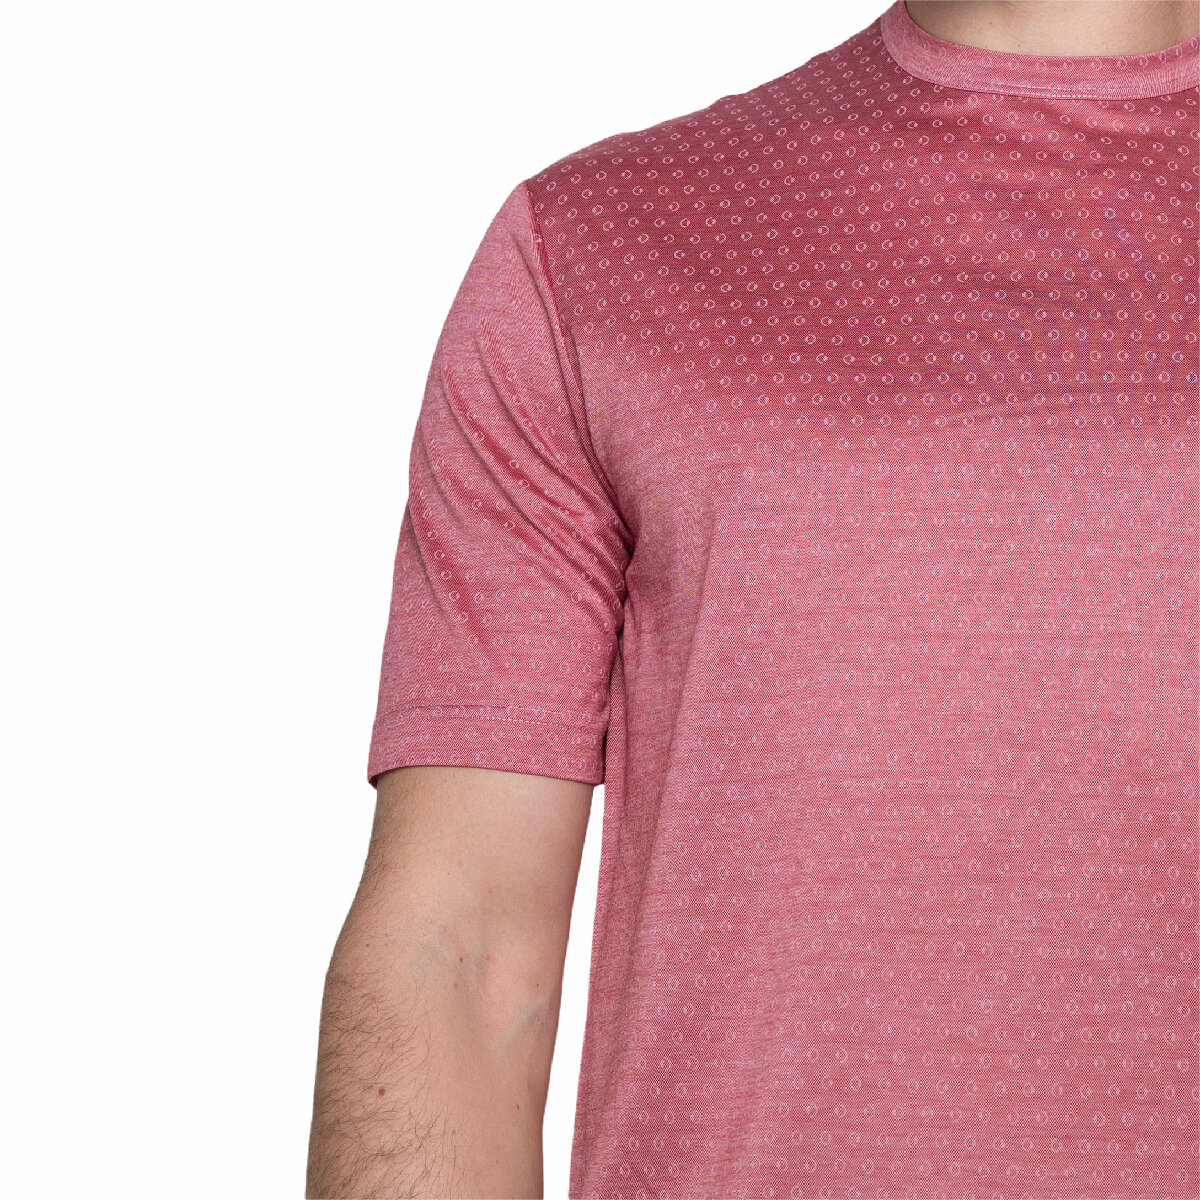 100% cotton jacquard T-SHIRT, salmon pink refined pattern, made in Italy